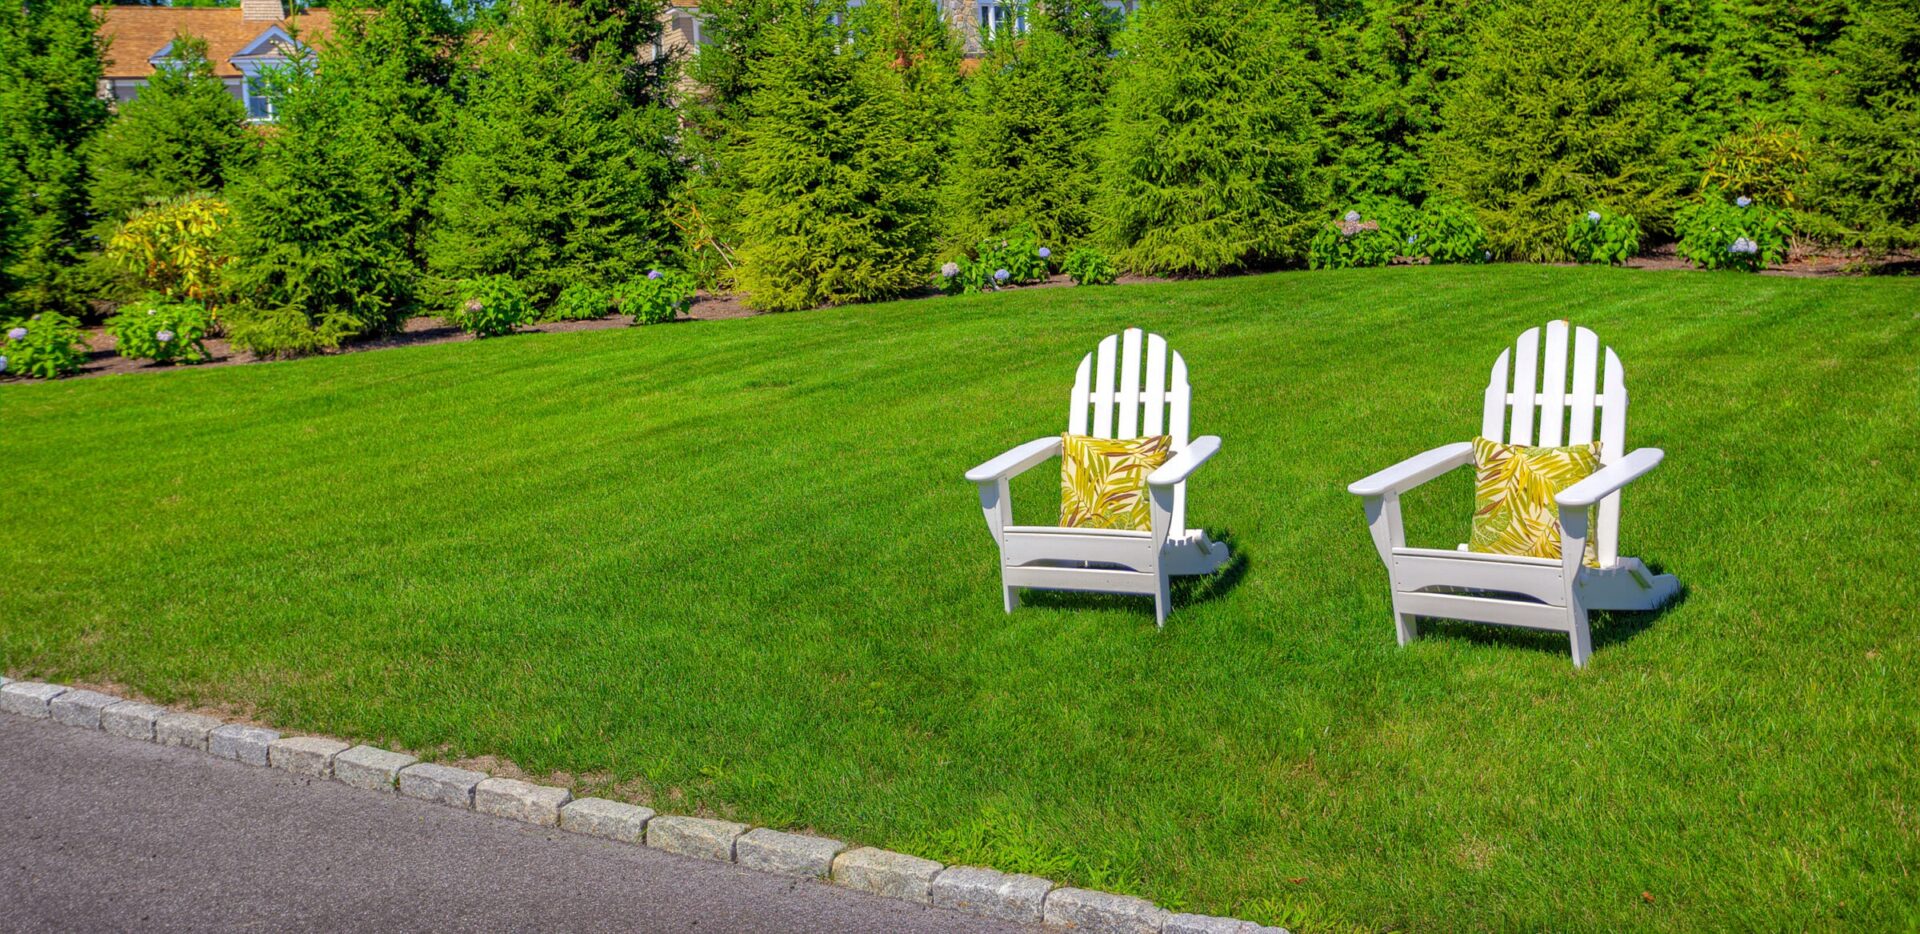 Two white Adirondack chairs with yellow-patterned pillows are placed on a neatly trimmed green lawn, with lush greenery and a house in the background.